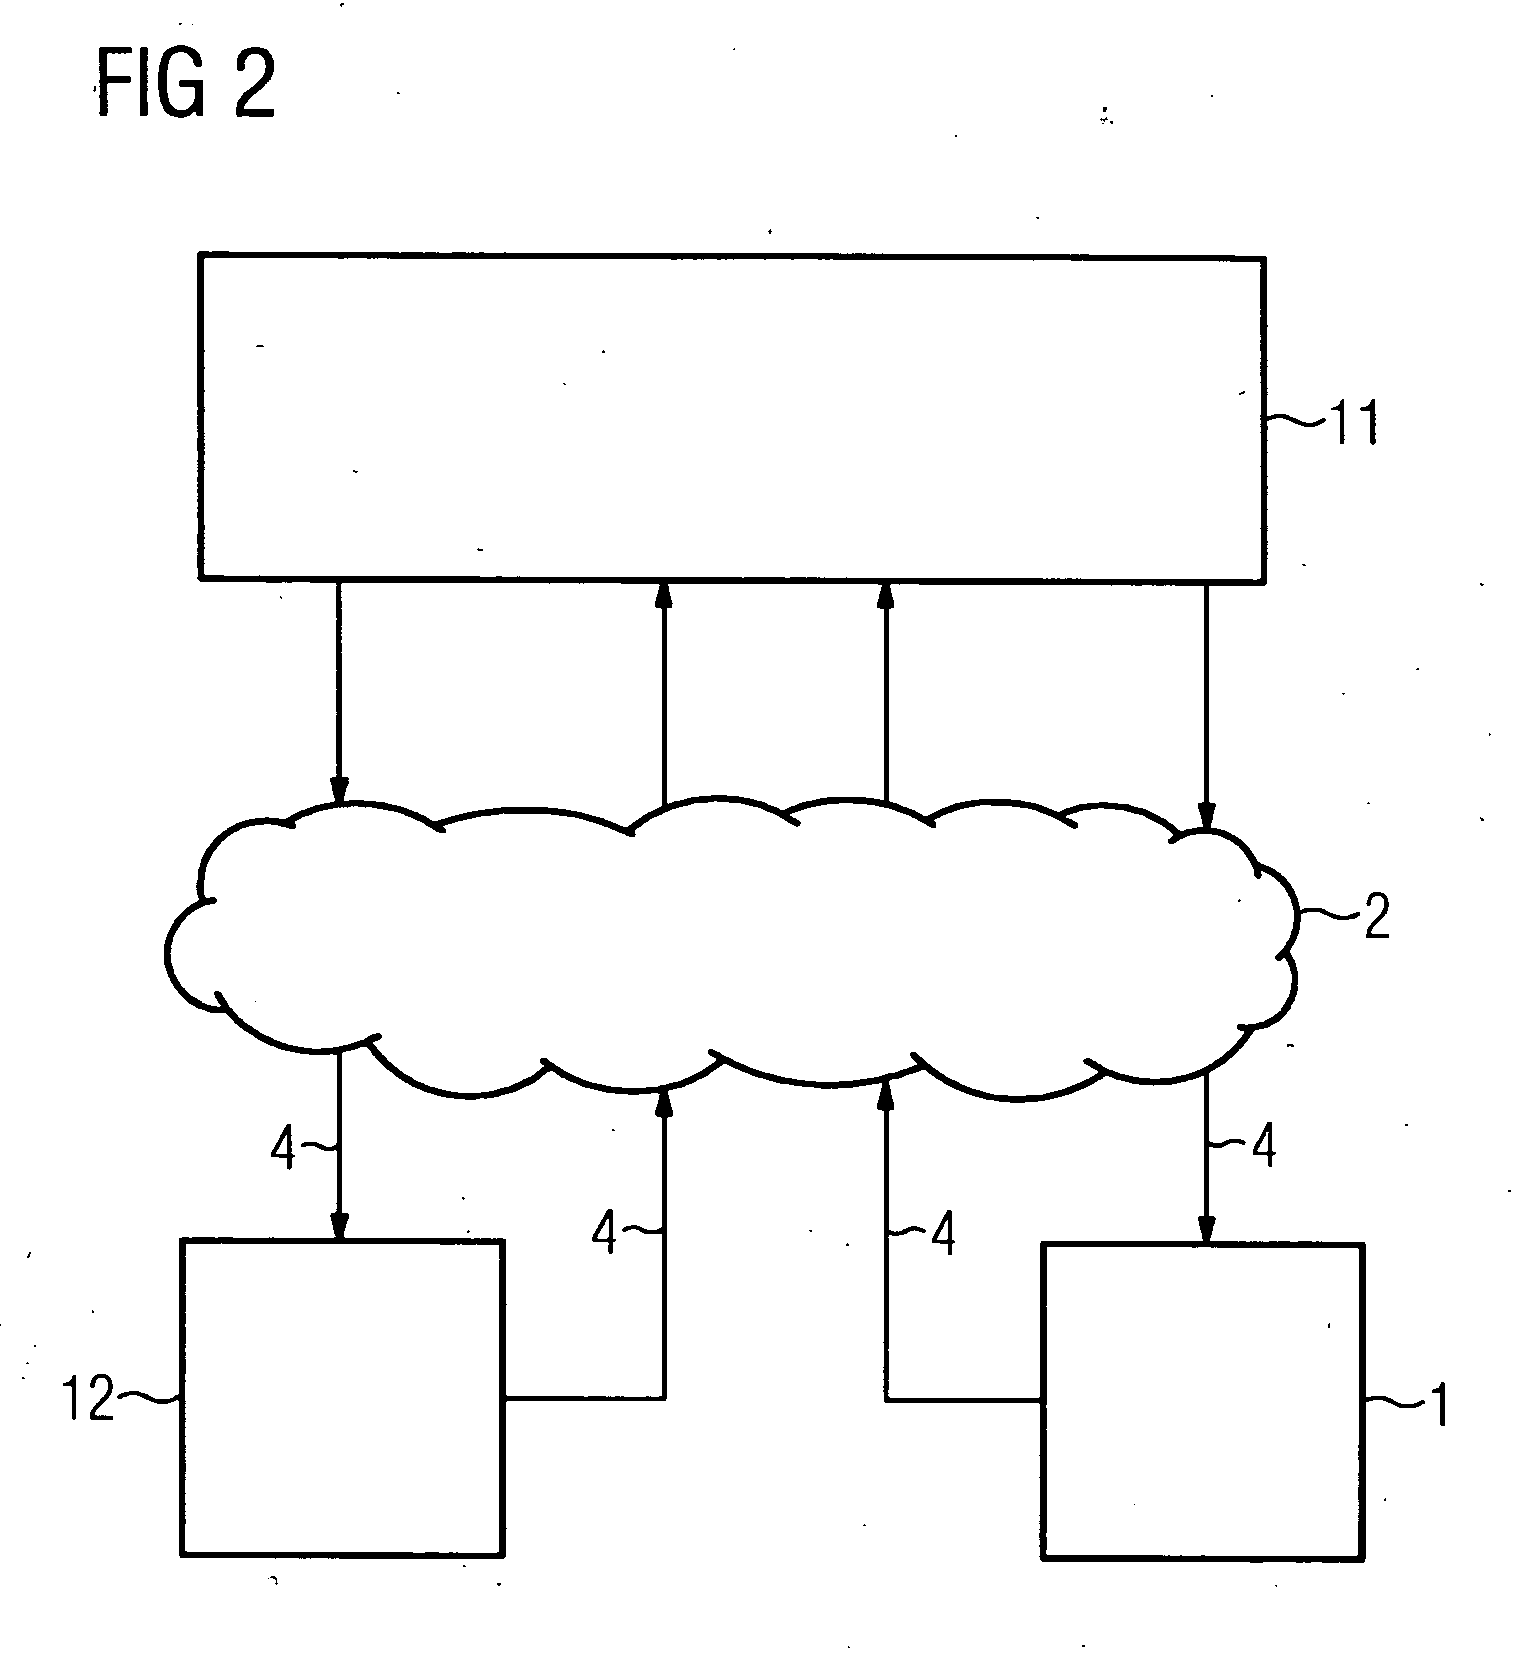 Method for Simulating a Controller and/or Machine Response of a Machine Tool or of a Production Machine